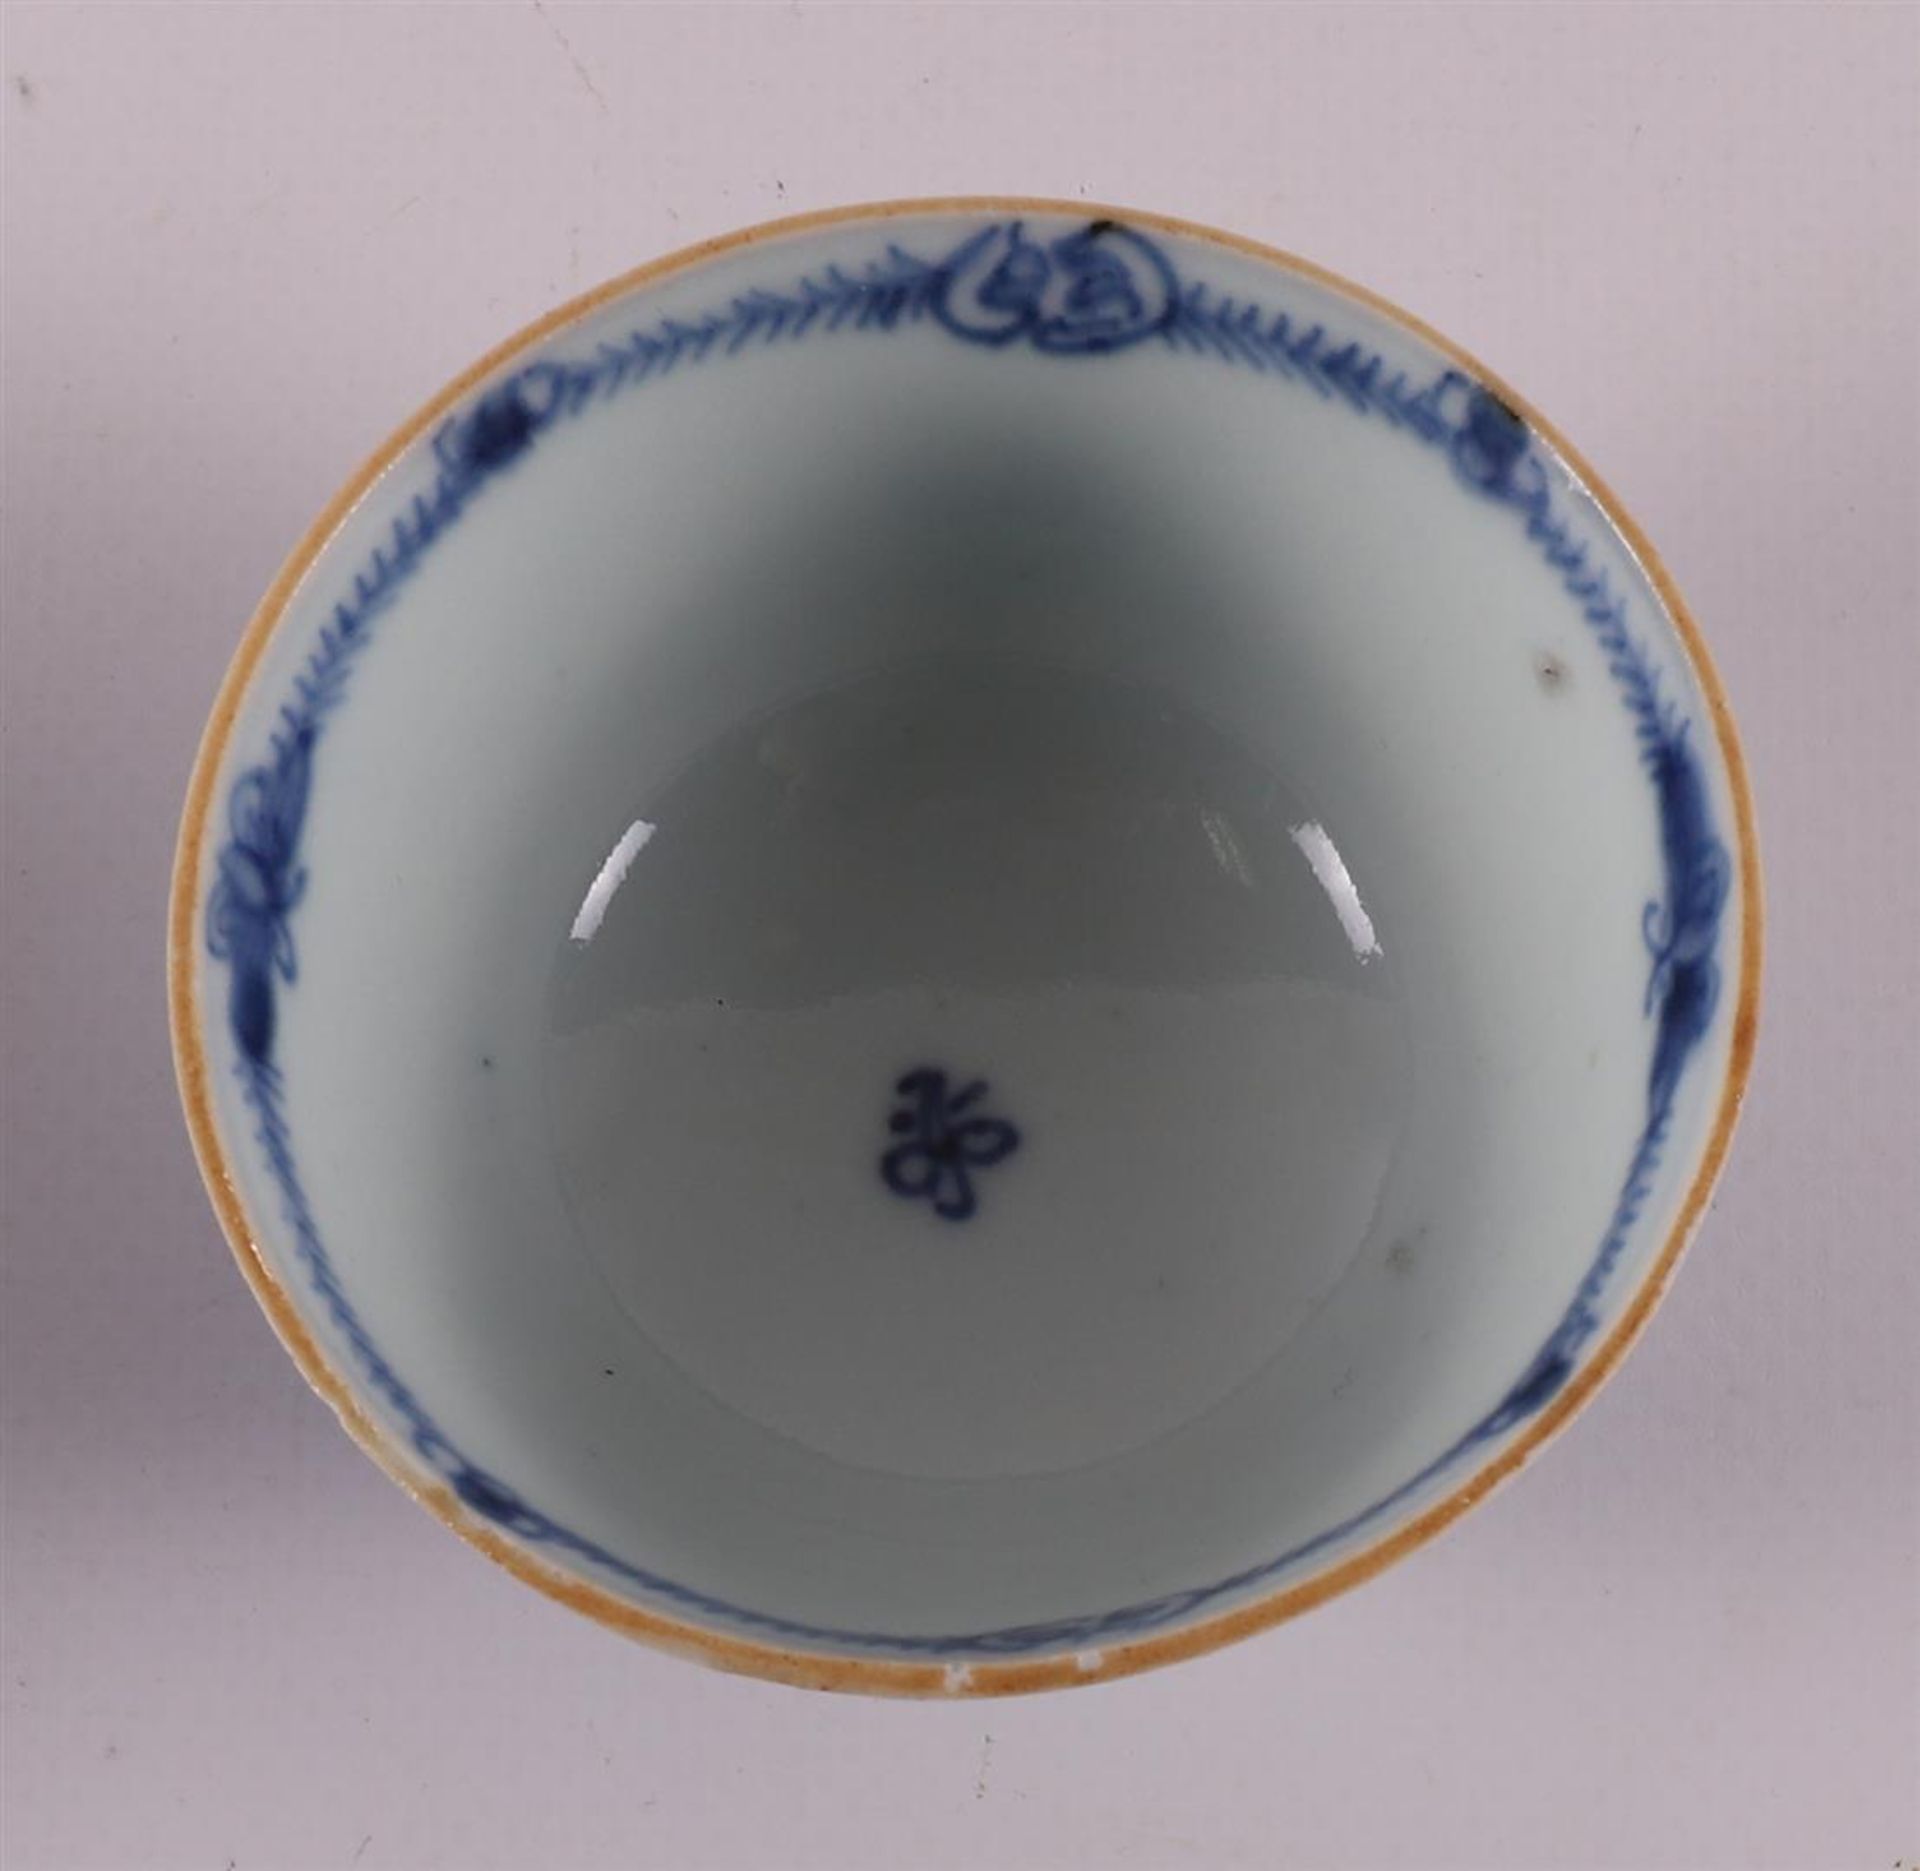 Six blue/white porcelain cups and saucers, China, Qianlong, 18th century. - Image 18 of 20